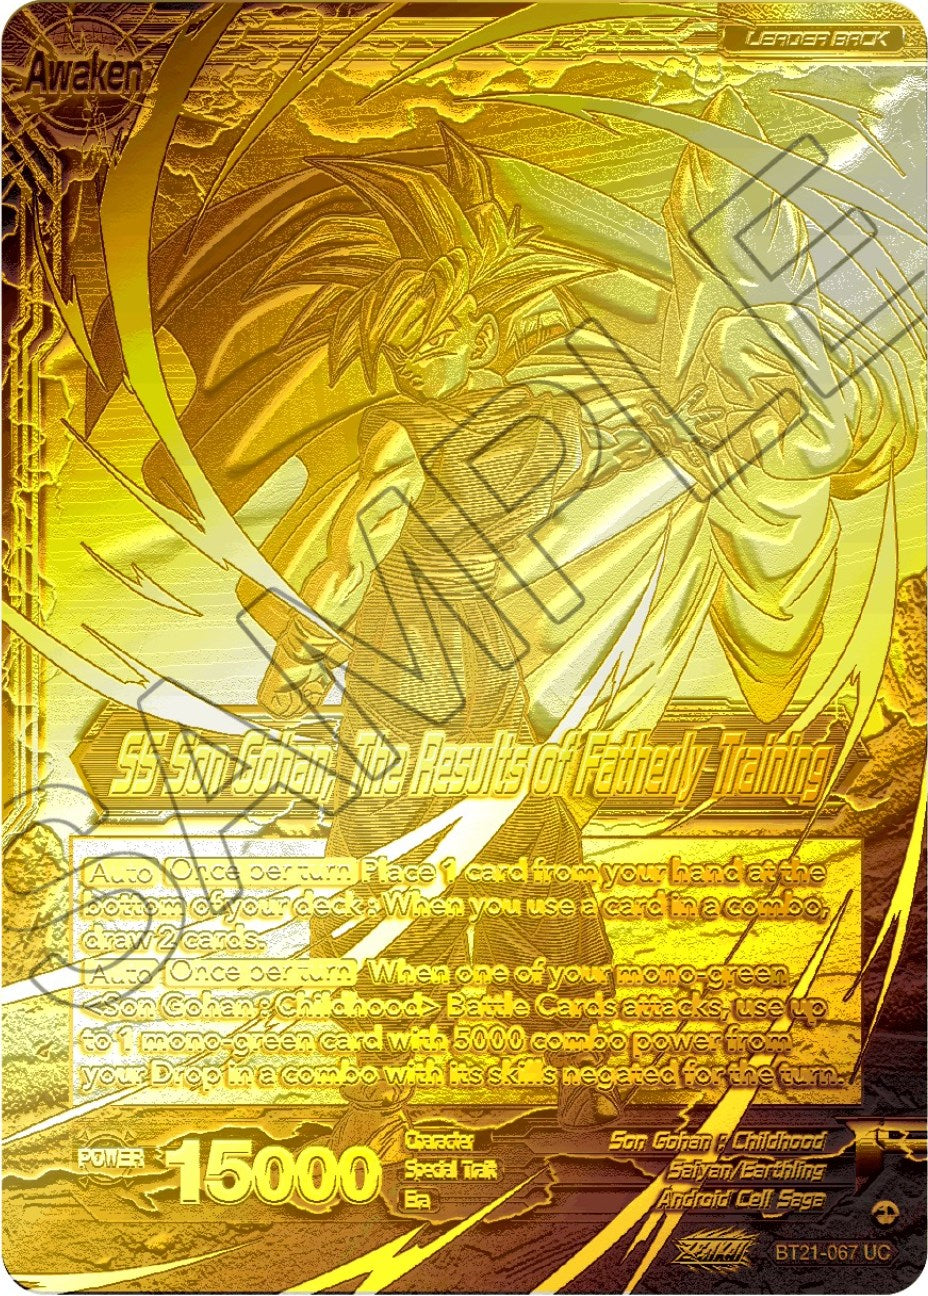 Son Gohan // SS Son Gohan, The Results of Fatherly Training (2023 Championship Finals) (Gold Metal Foil) (BT21-067) [Tournament Promotion Cards] | Pegasus Games WI